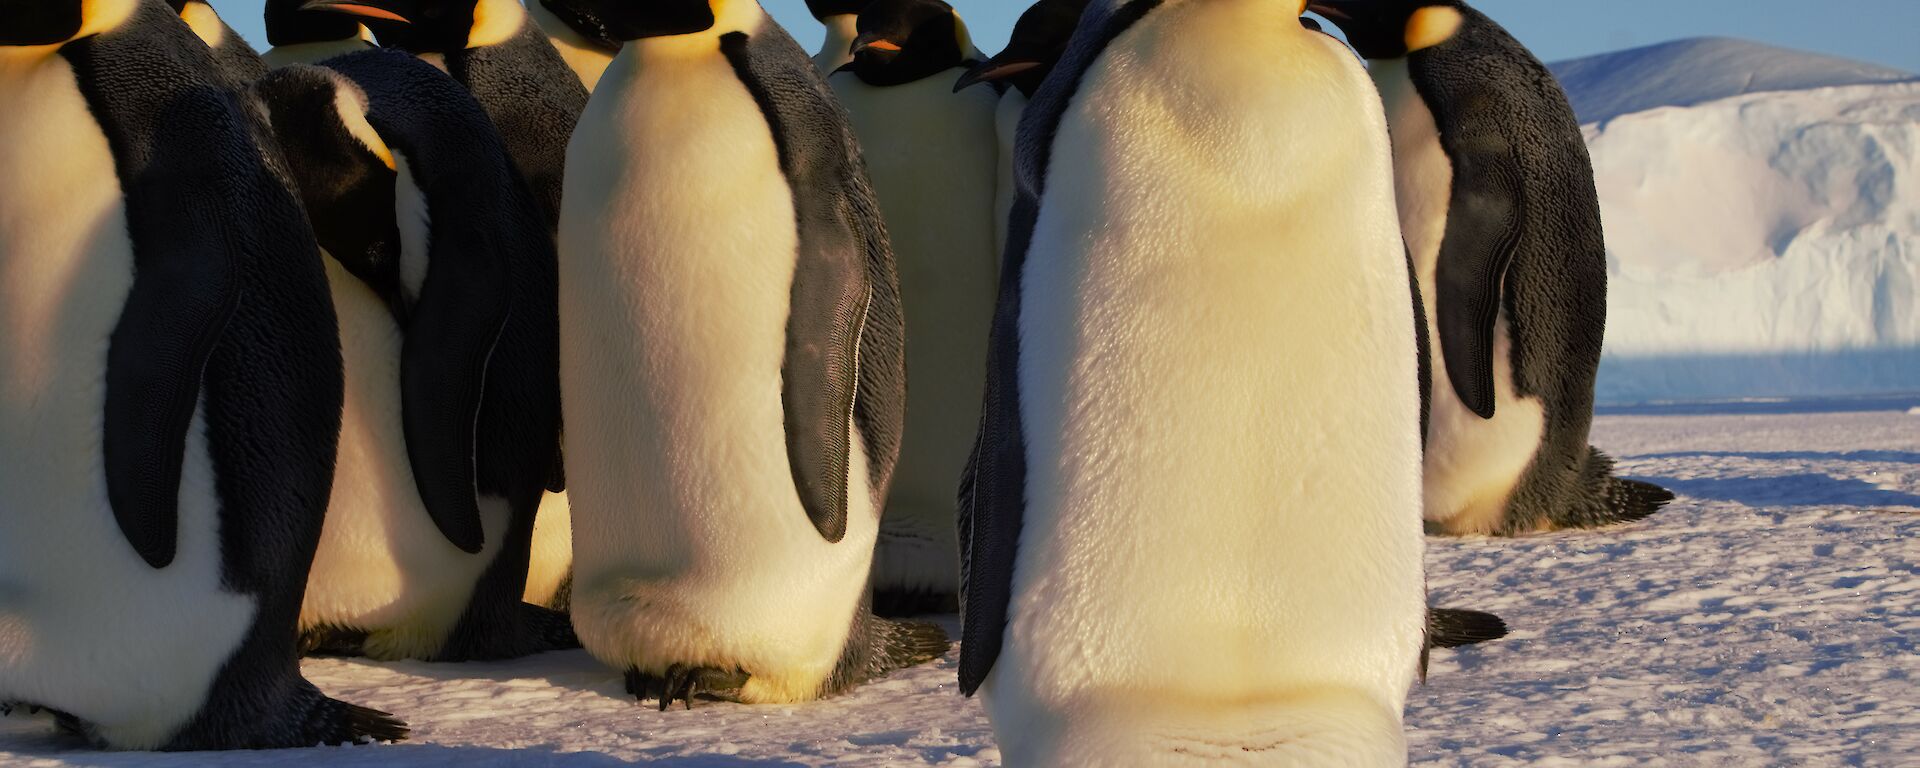 A number of large, emperor penguins are in a group close to the camera. They are standing on ice and there is a large ice berg in the distance.